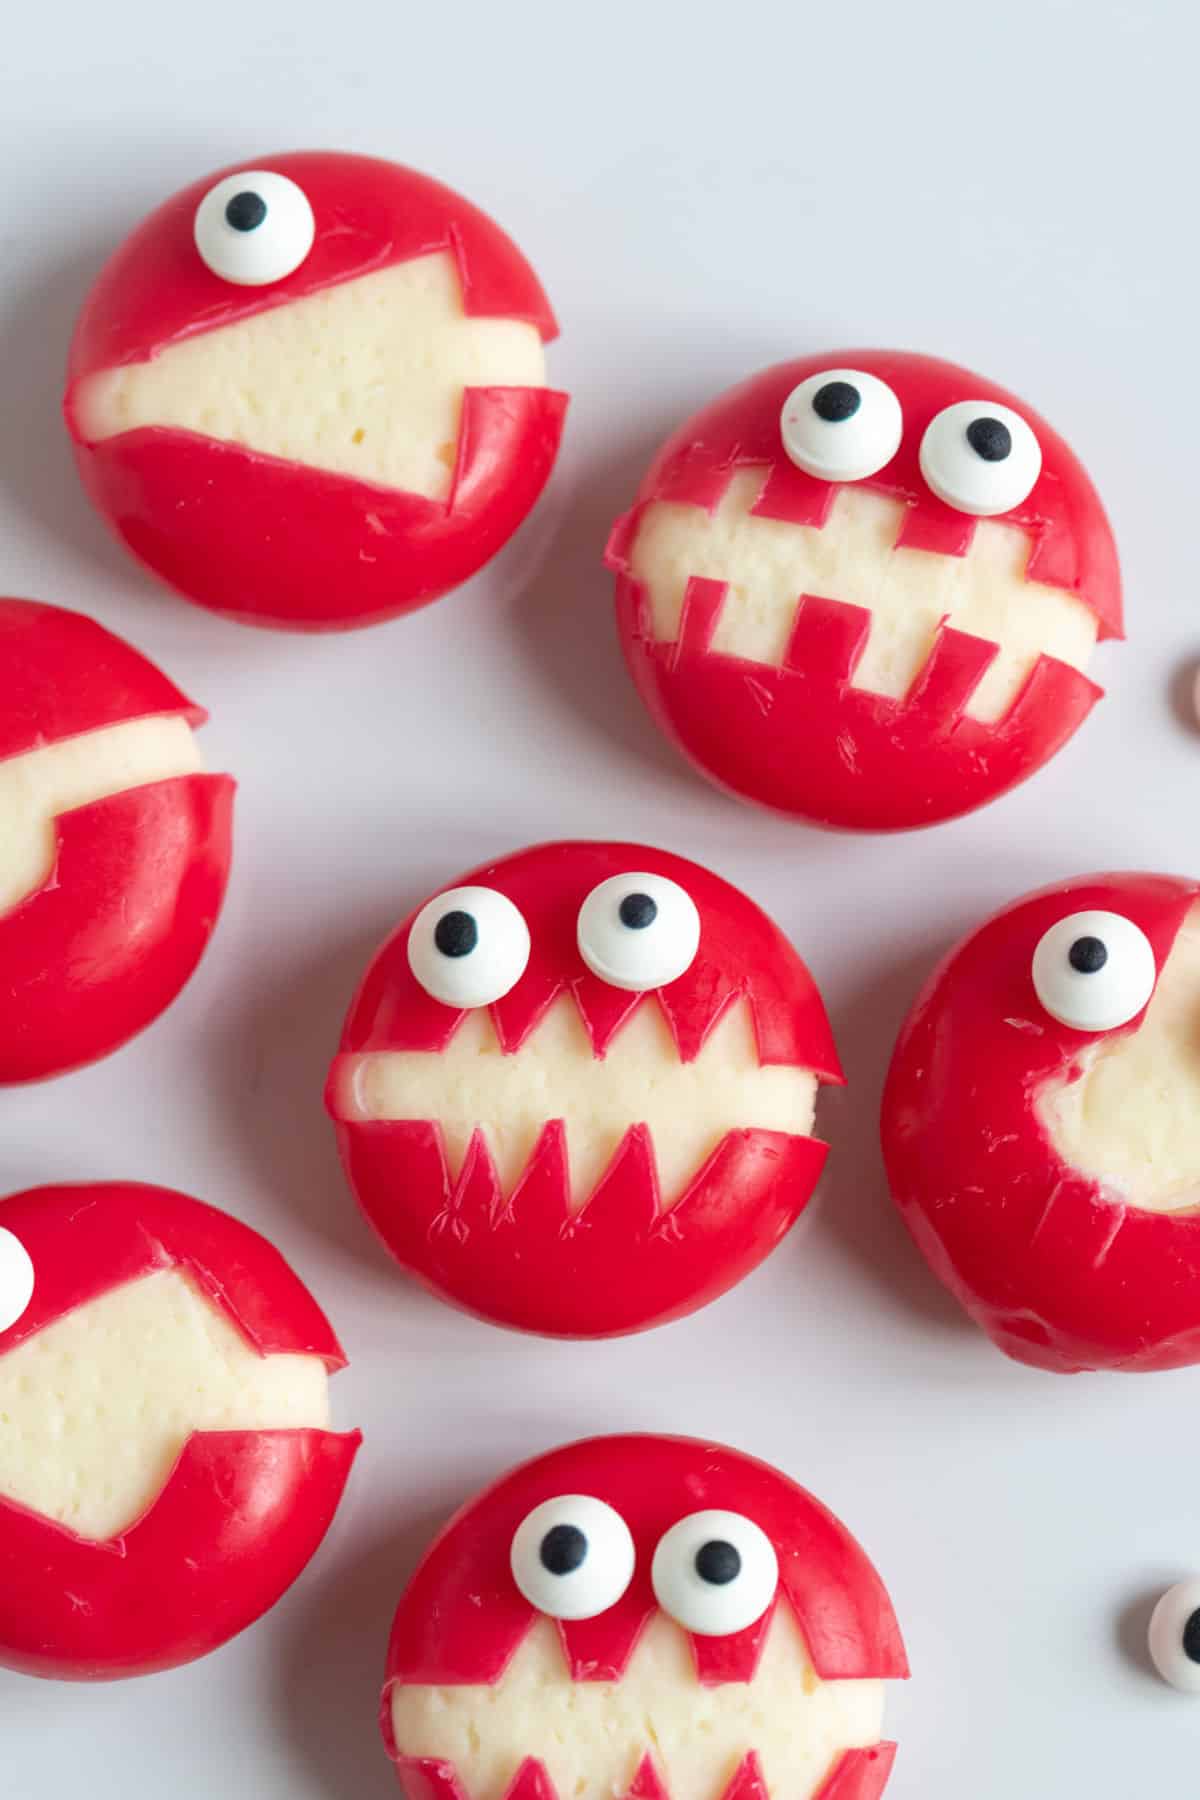 Babybel cheese monsters with edible eyes.